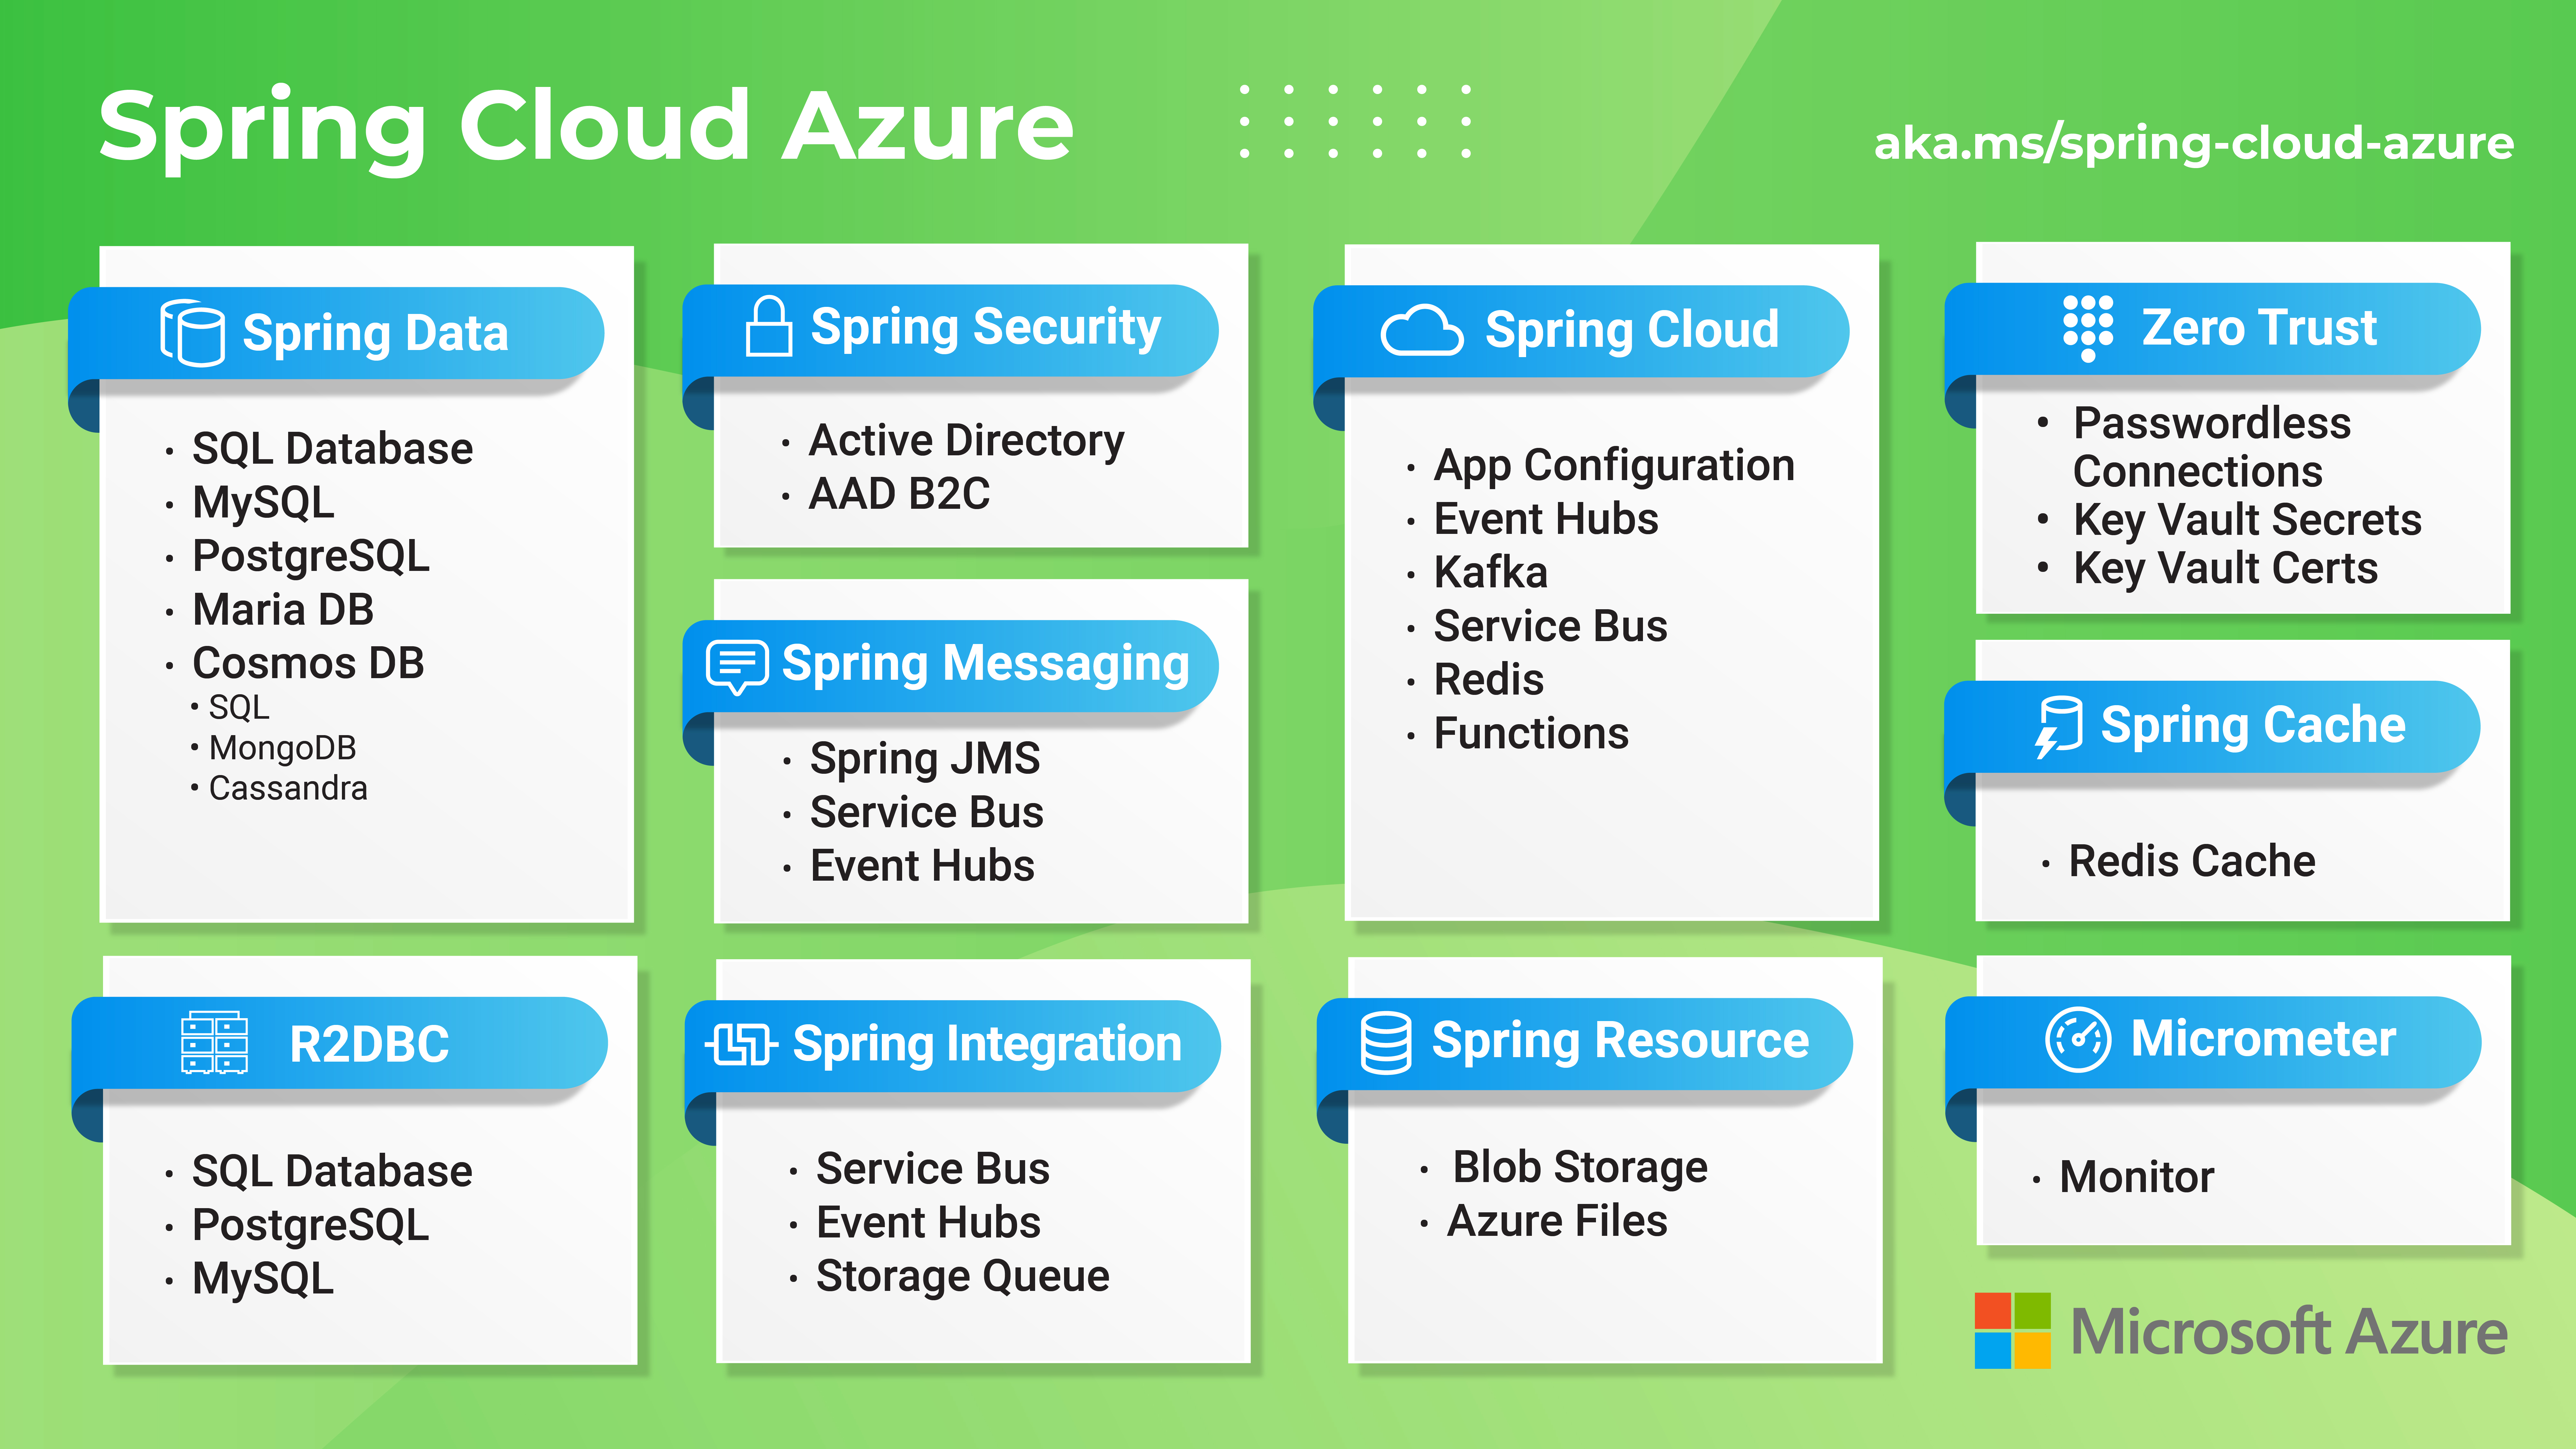 Diagram providing an overview of Spring Cloud Azure features.